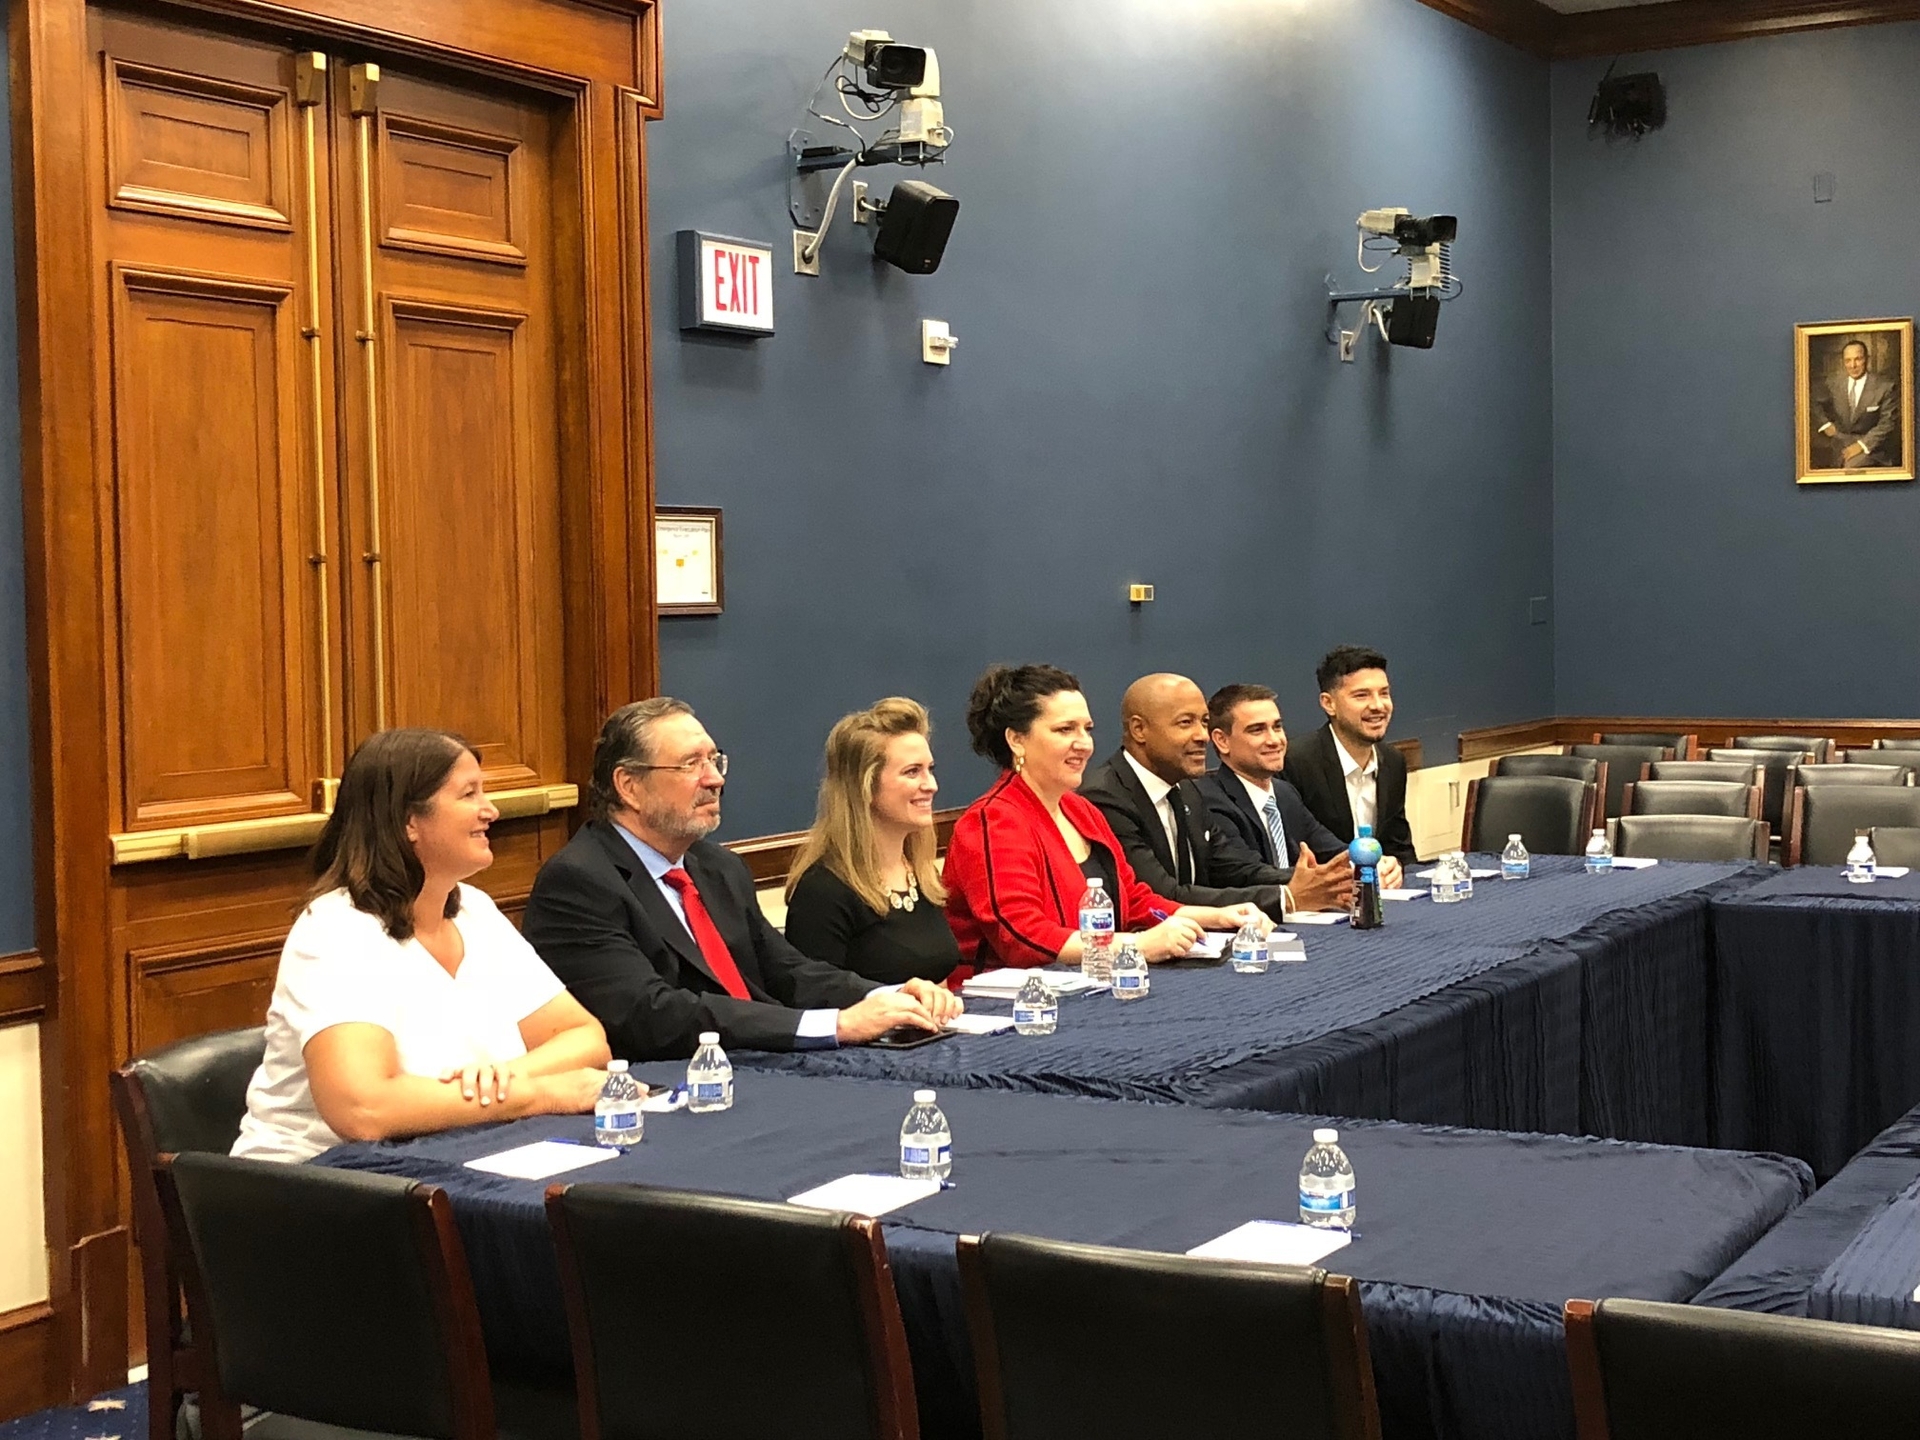 Small business owners, seated at a table, as they meet with political leaders in Washington D.C.